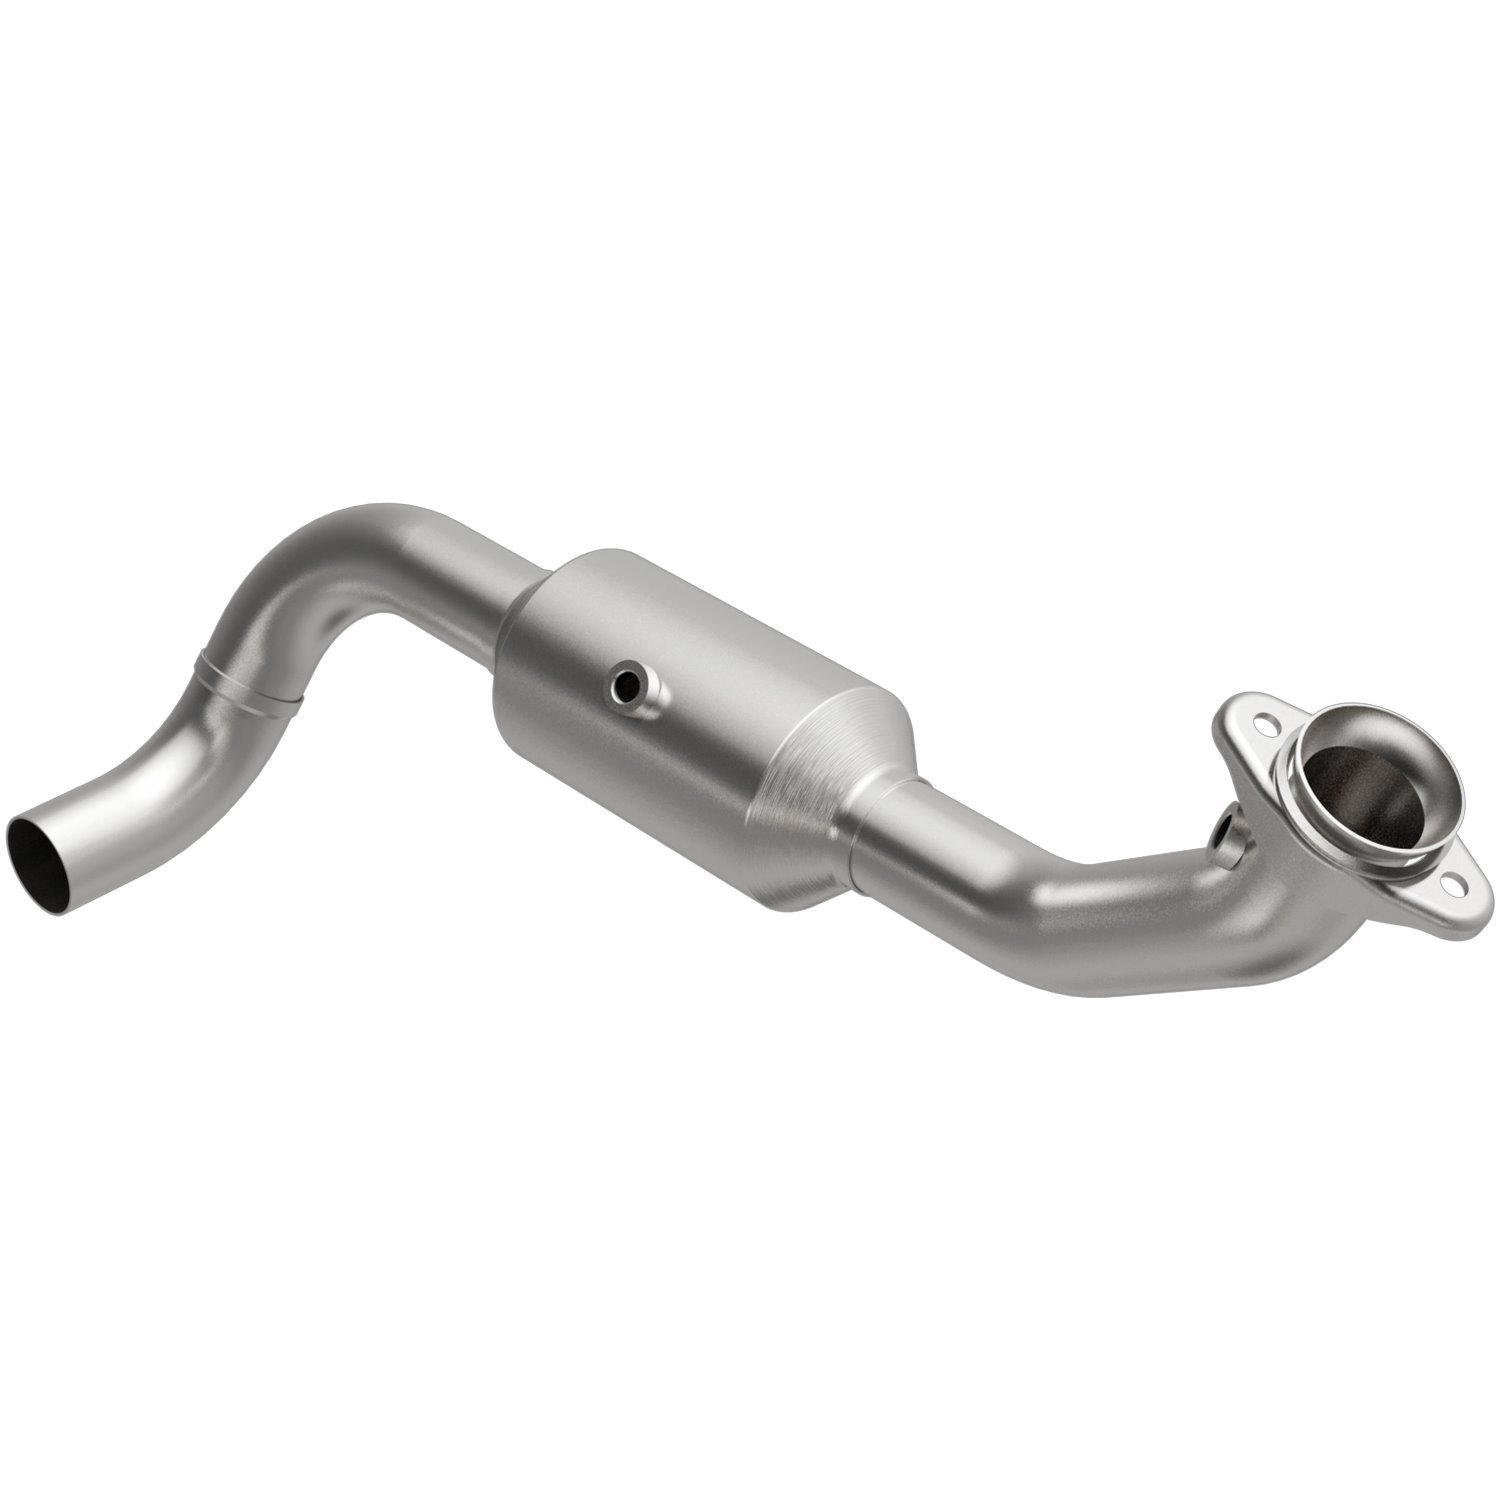 2007-2008 Ford F-150 OEM Grade Federal / EPA Compliant Direct-Fit Catalytic Converter